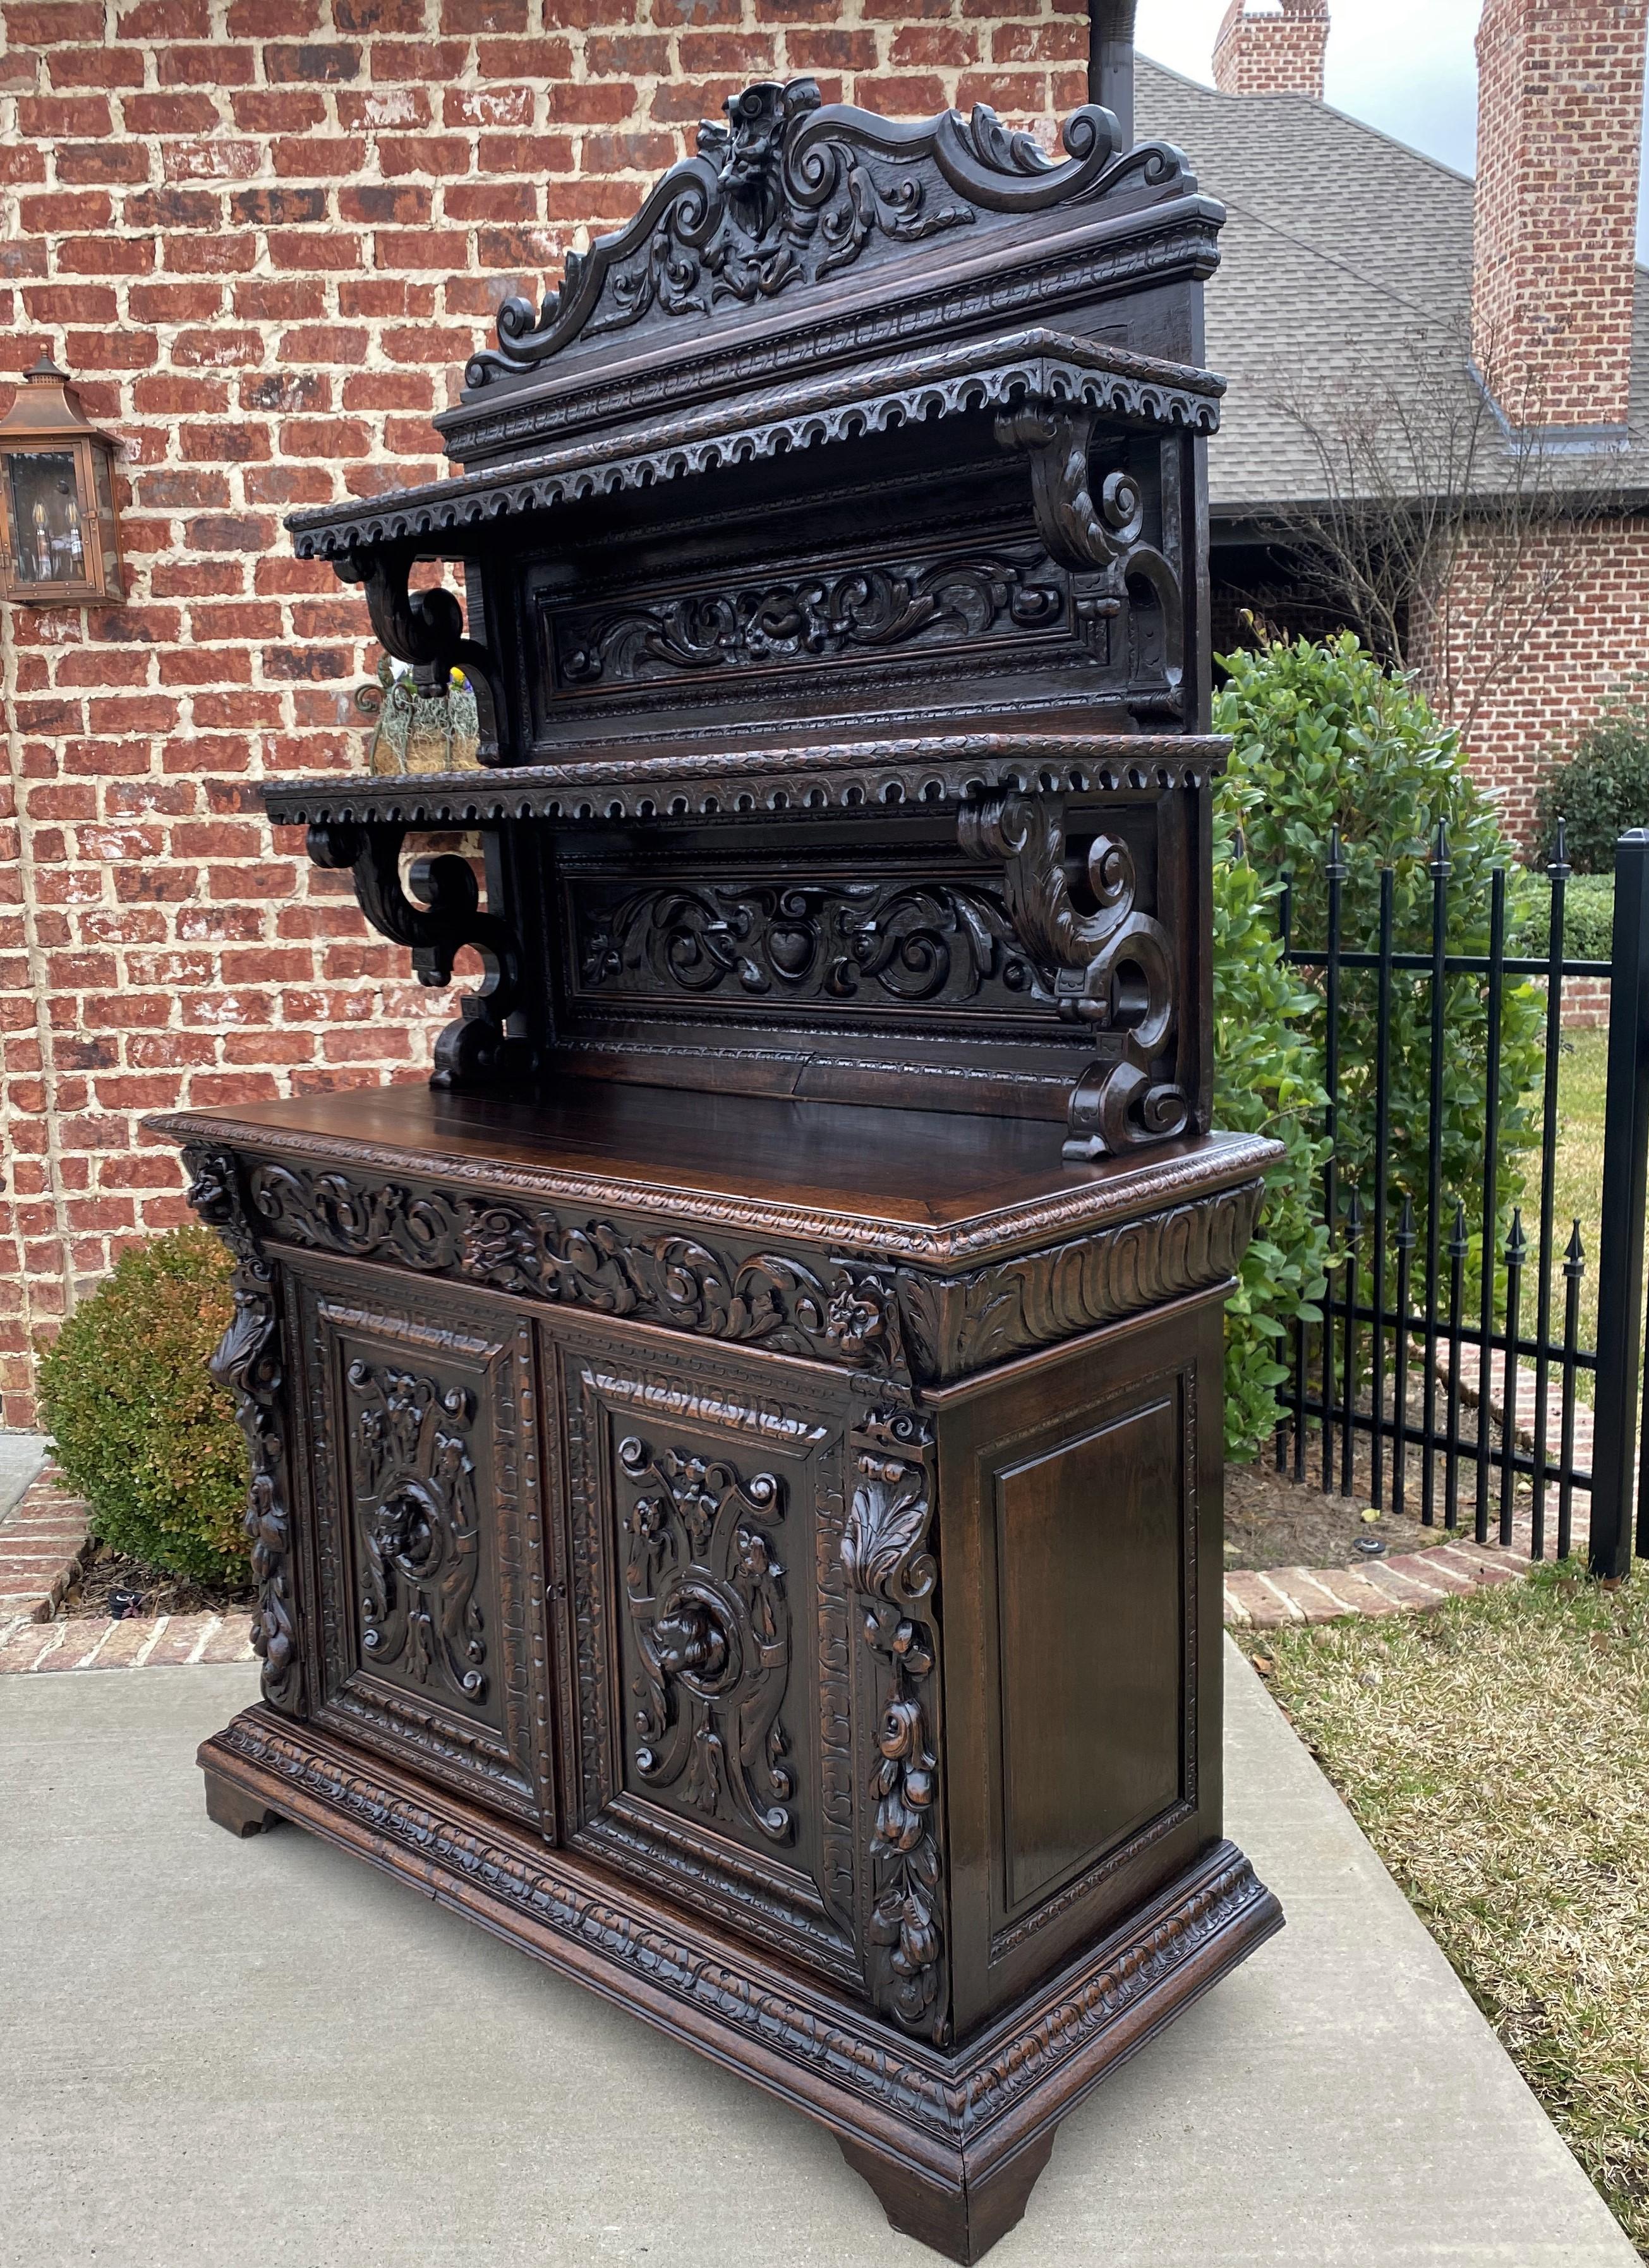 Superb 19th century antique French oak 3-tier Renaissance Revival server sideboard buffet cabinet~~lions and cherubs~~c. 1880s

This is only one of multiple exquisite pieces recently received from our European shipper~~wonderful hand-carved oak